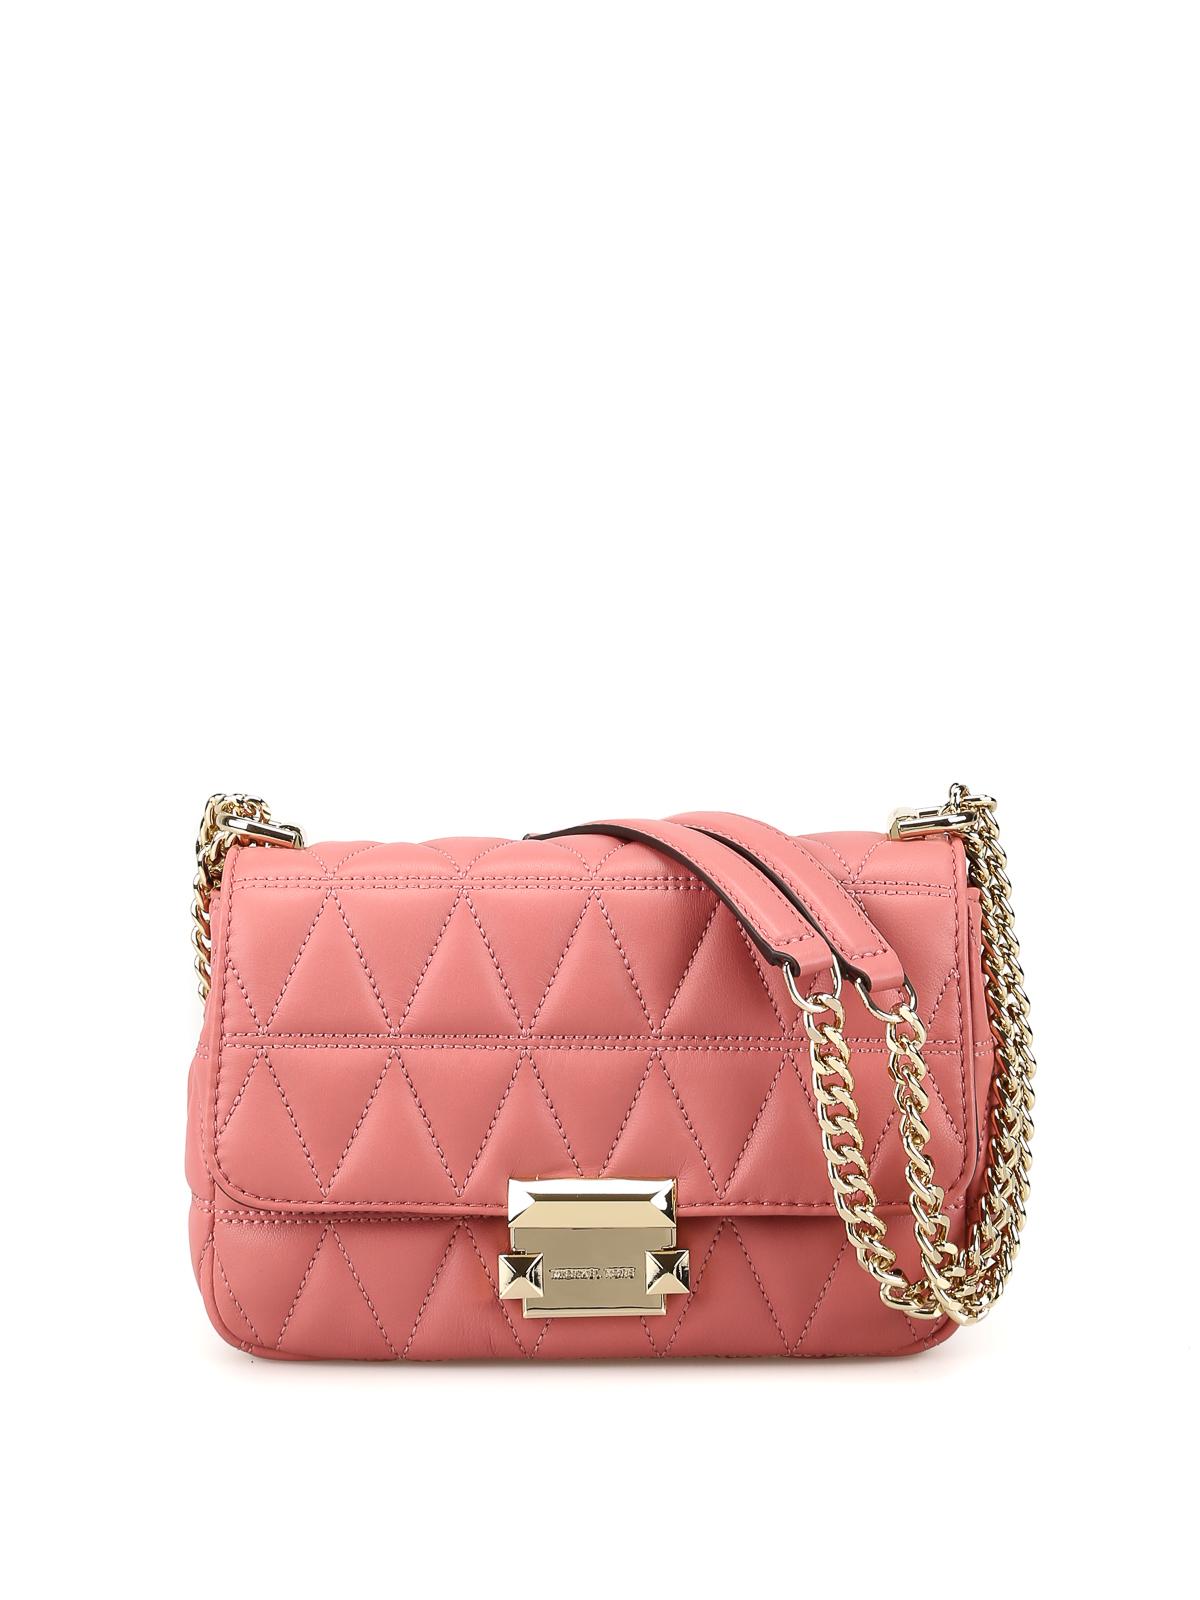 Michael Kors Leather Sloan Pink Quilted Small Shoulder Bag - Lyst